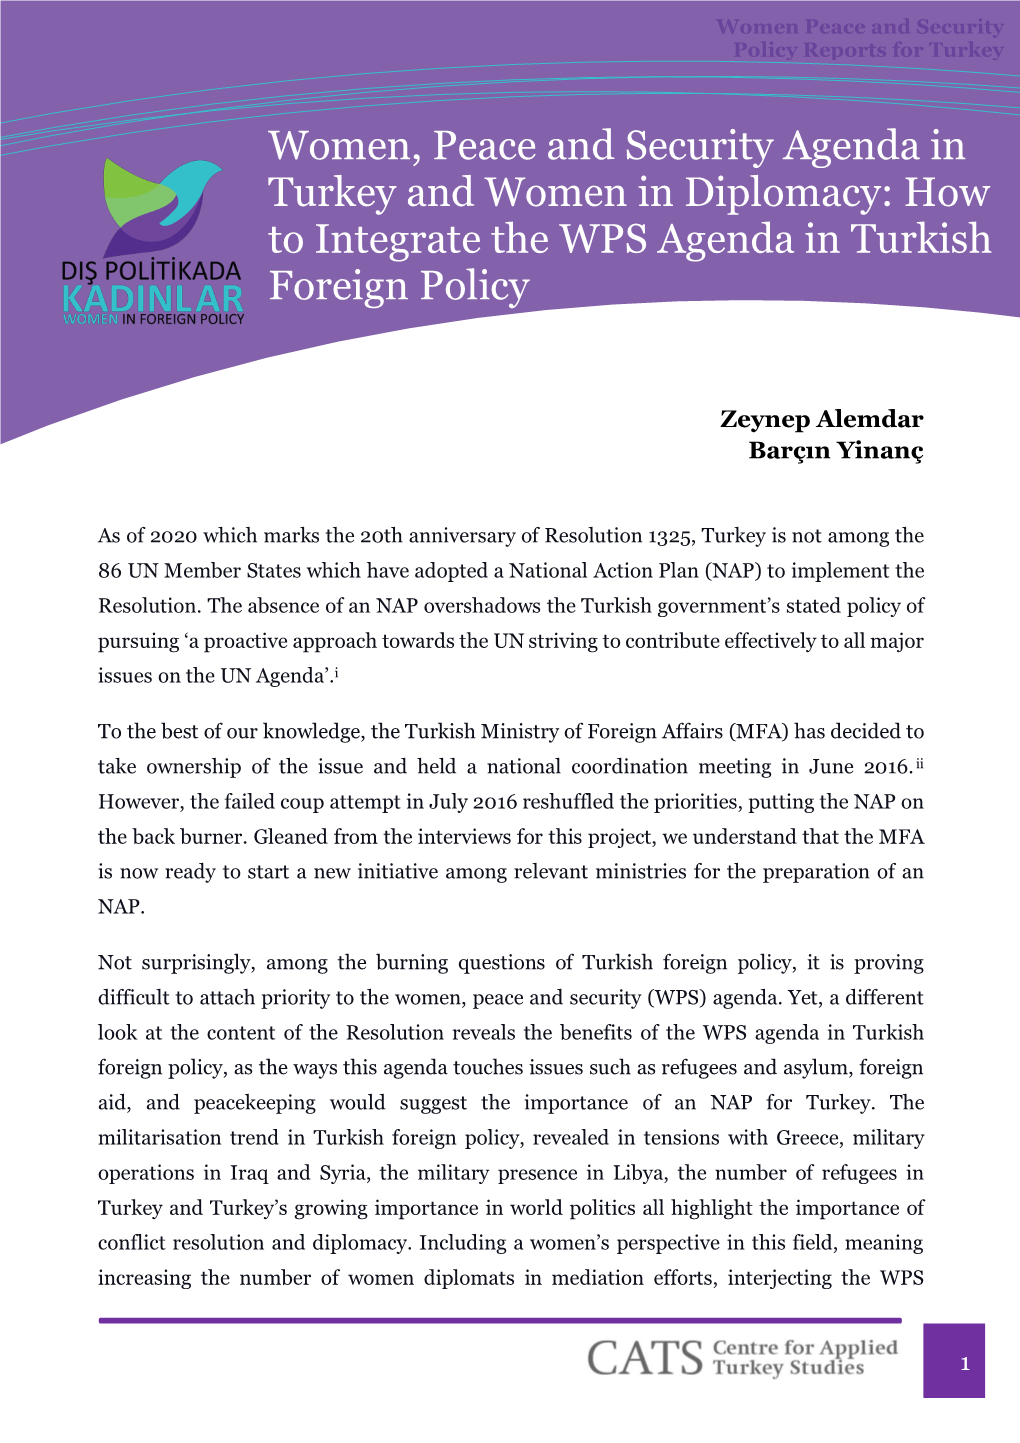 How to Integrate the WPS Agenda in Turkish Foreign Policy